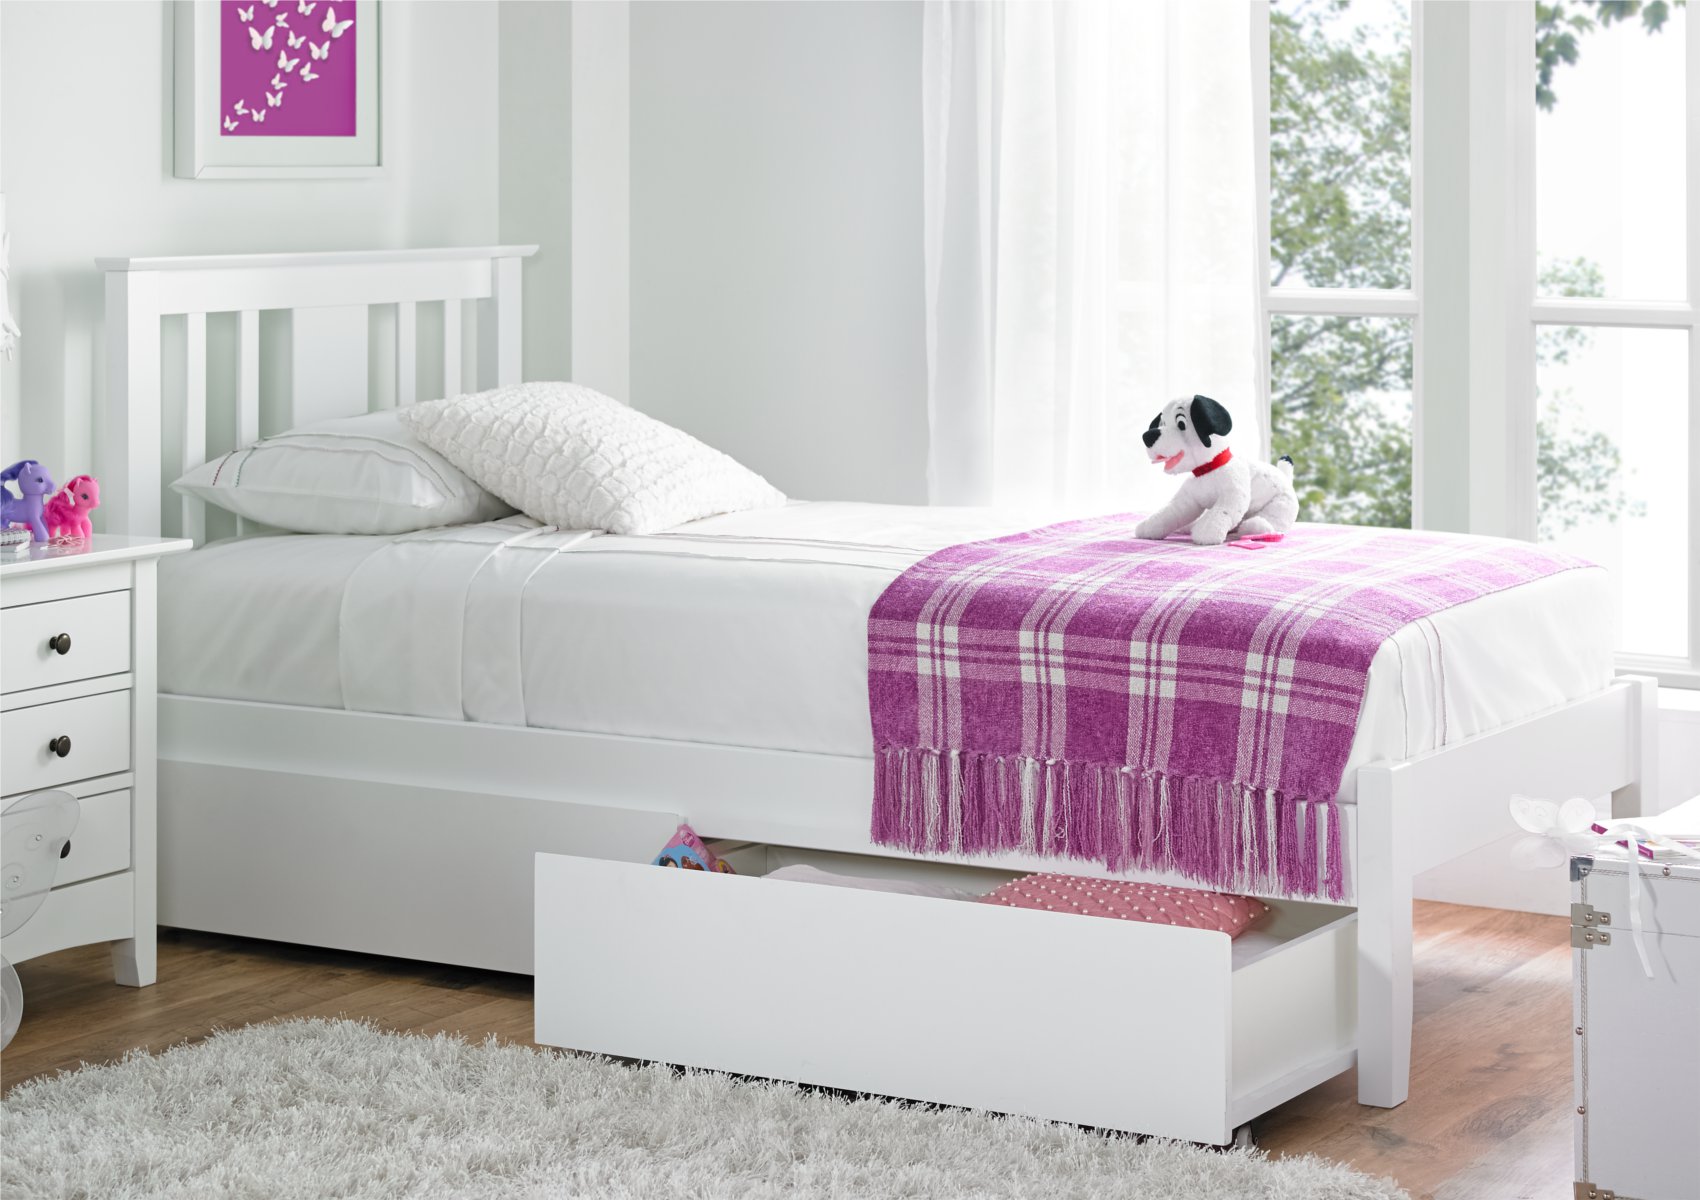 View Malmo White Wooden Single Childrens Bed Time4Sleep information